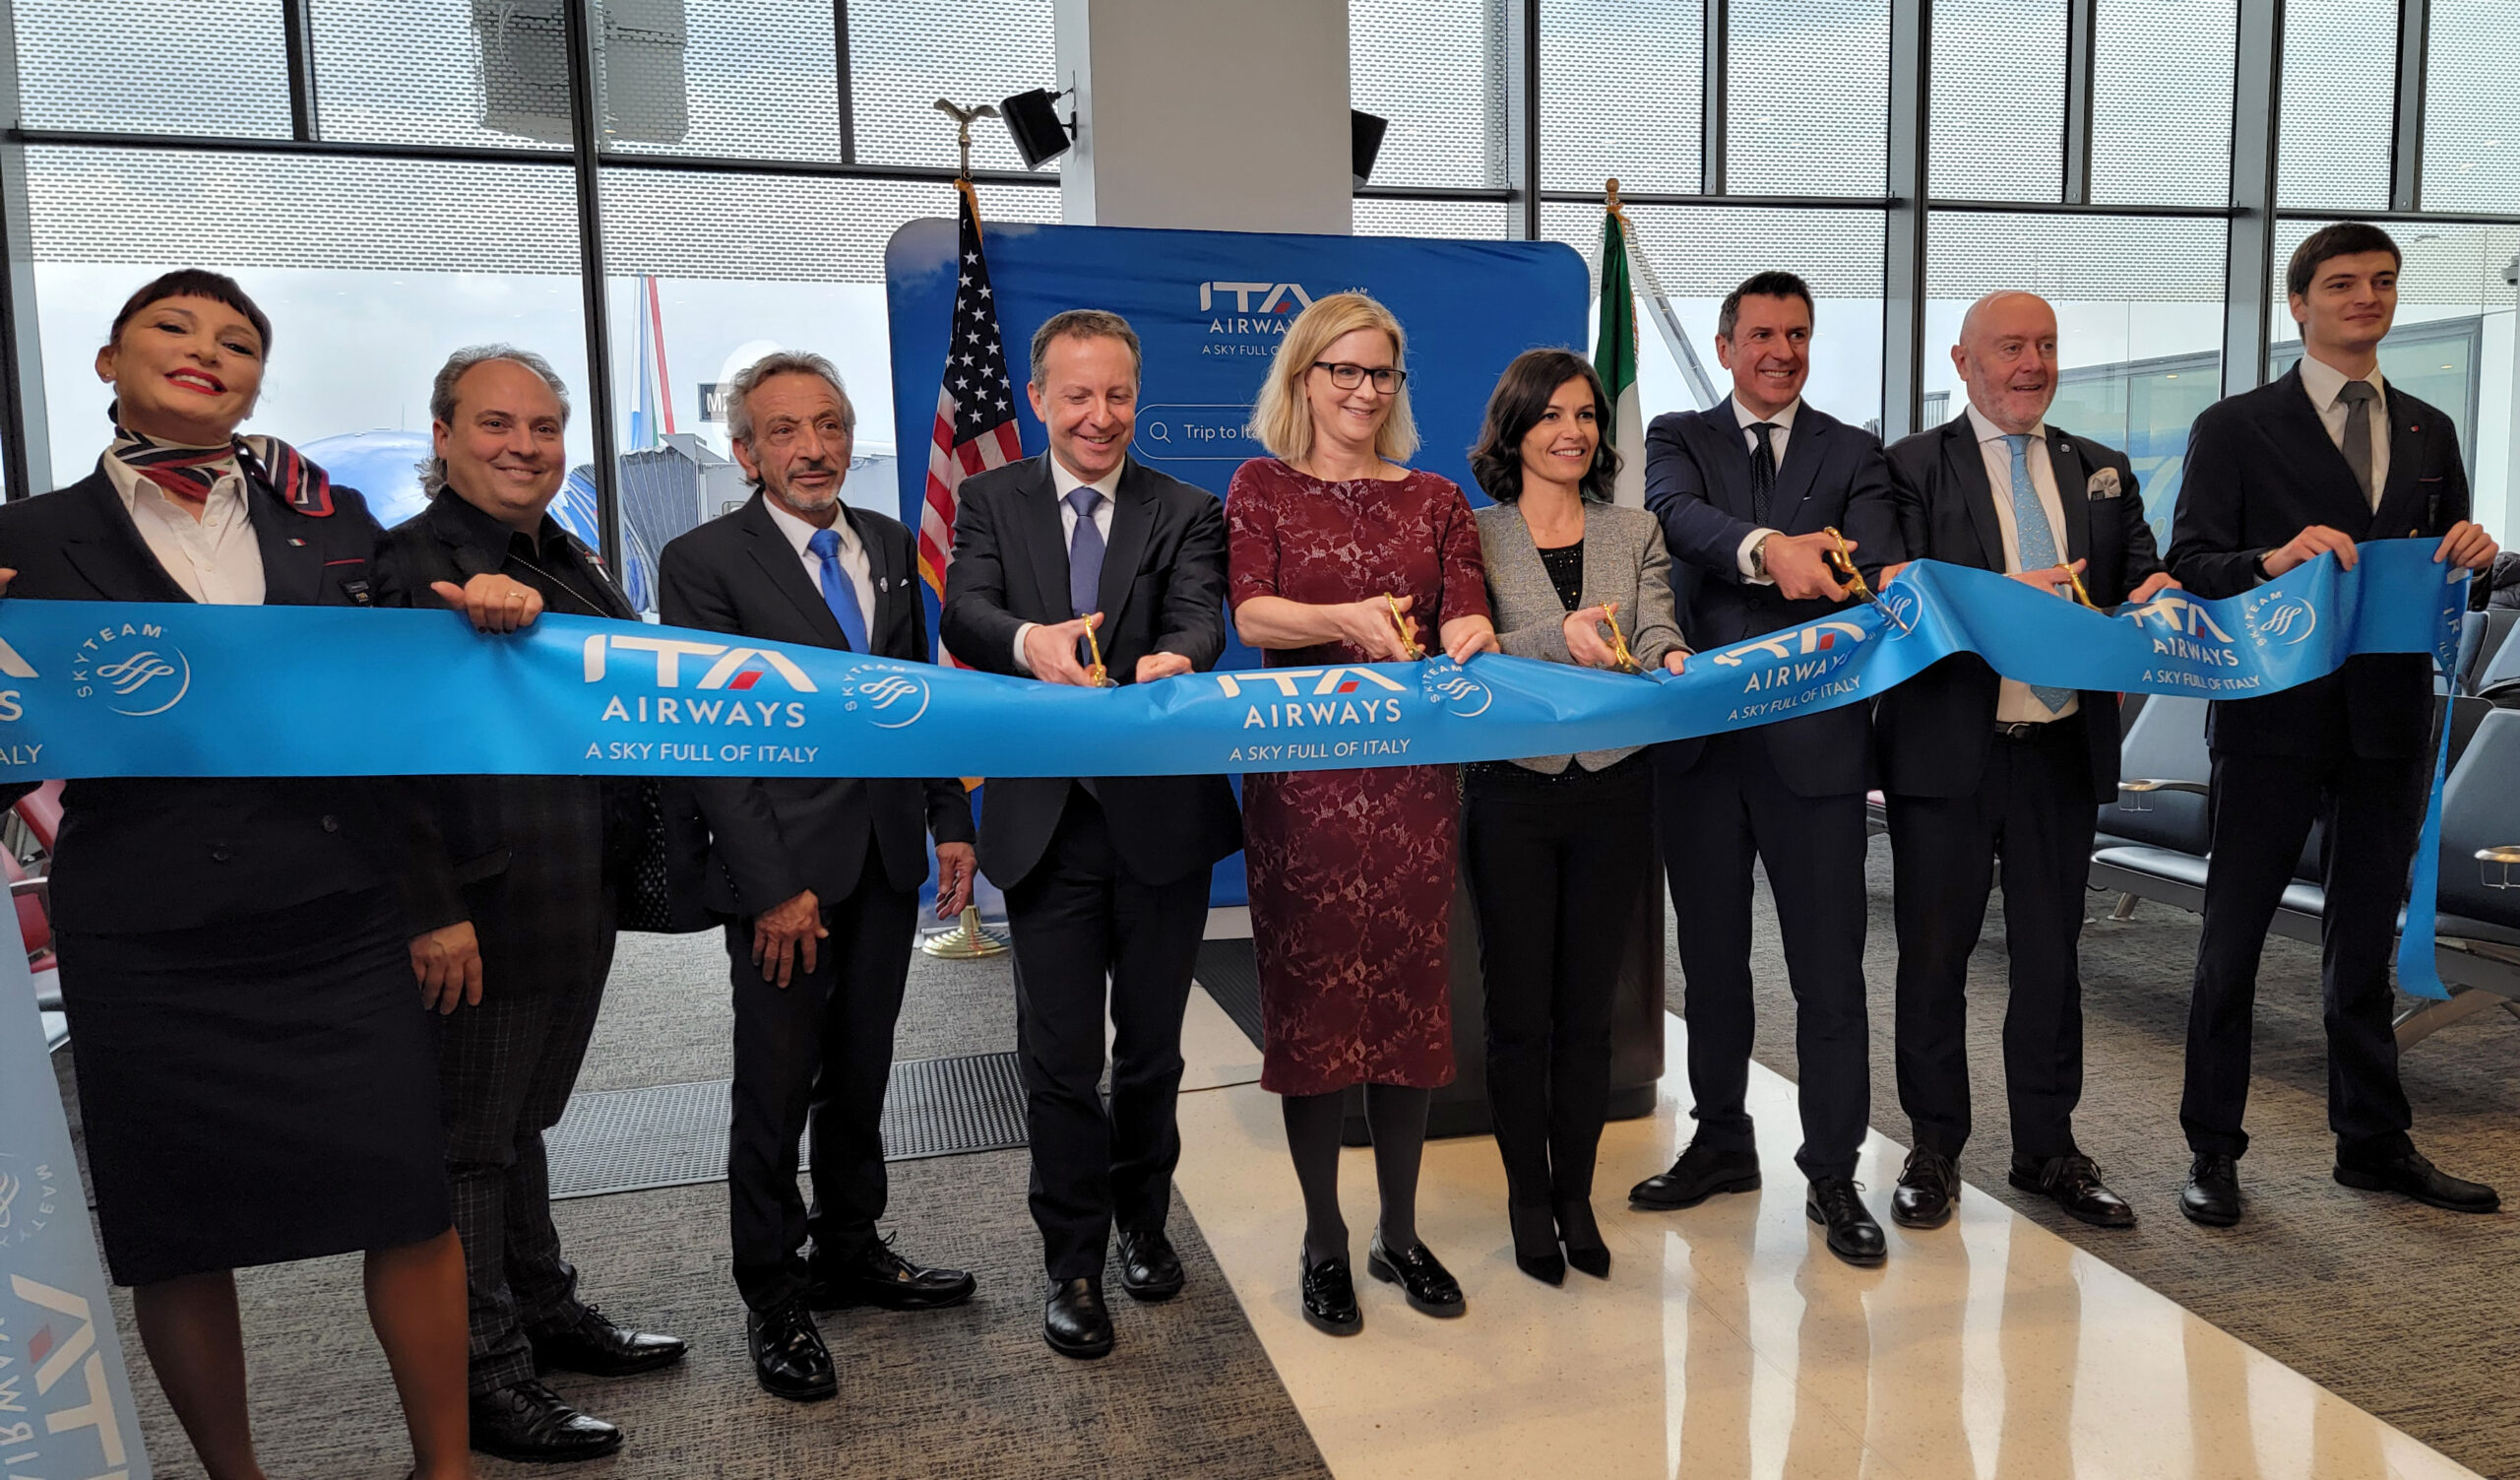 ITA Airways Launches Route to Chicago, Sets Sights on Financial Revival